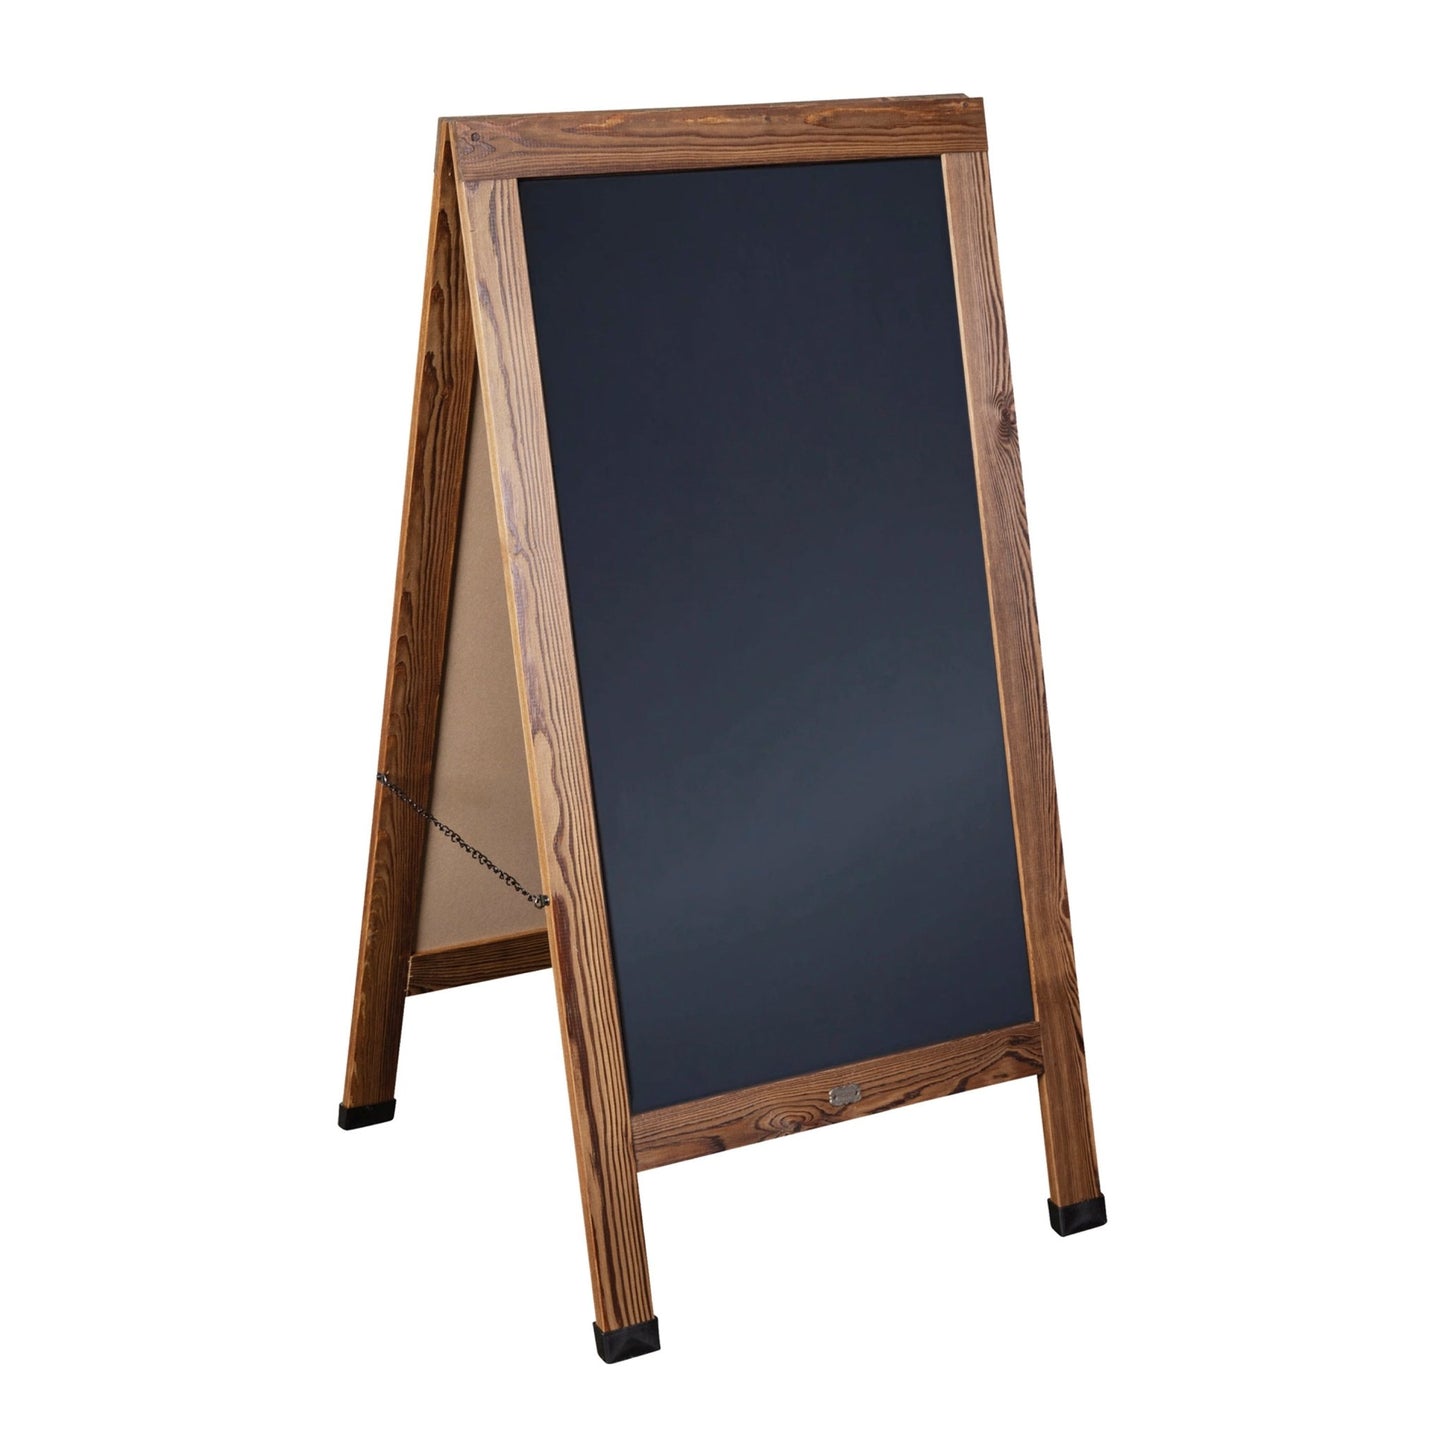 Canterbury 48" x 24" Vintage Wooden A-Frame Indoor/Outdoor A-Frame Magnetic Chalkboard Sign Set with 8 Chalk Markers, 10 Stencils, 2 Magnets - SchoolOutlet